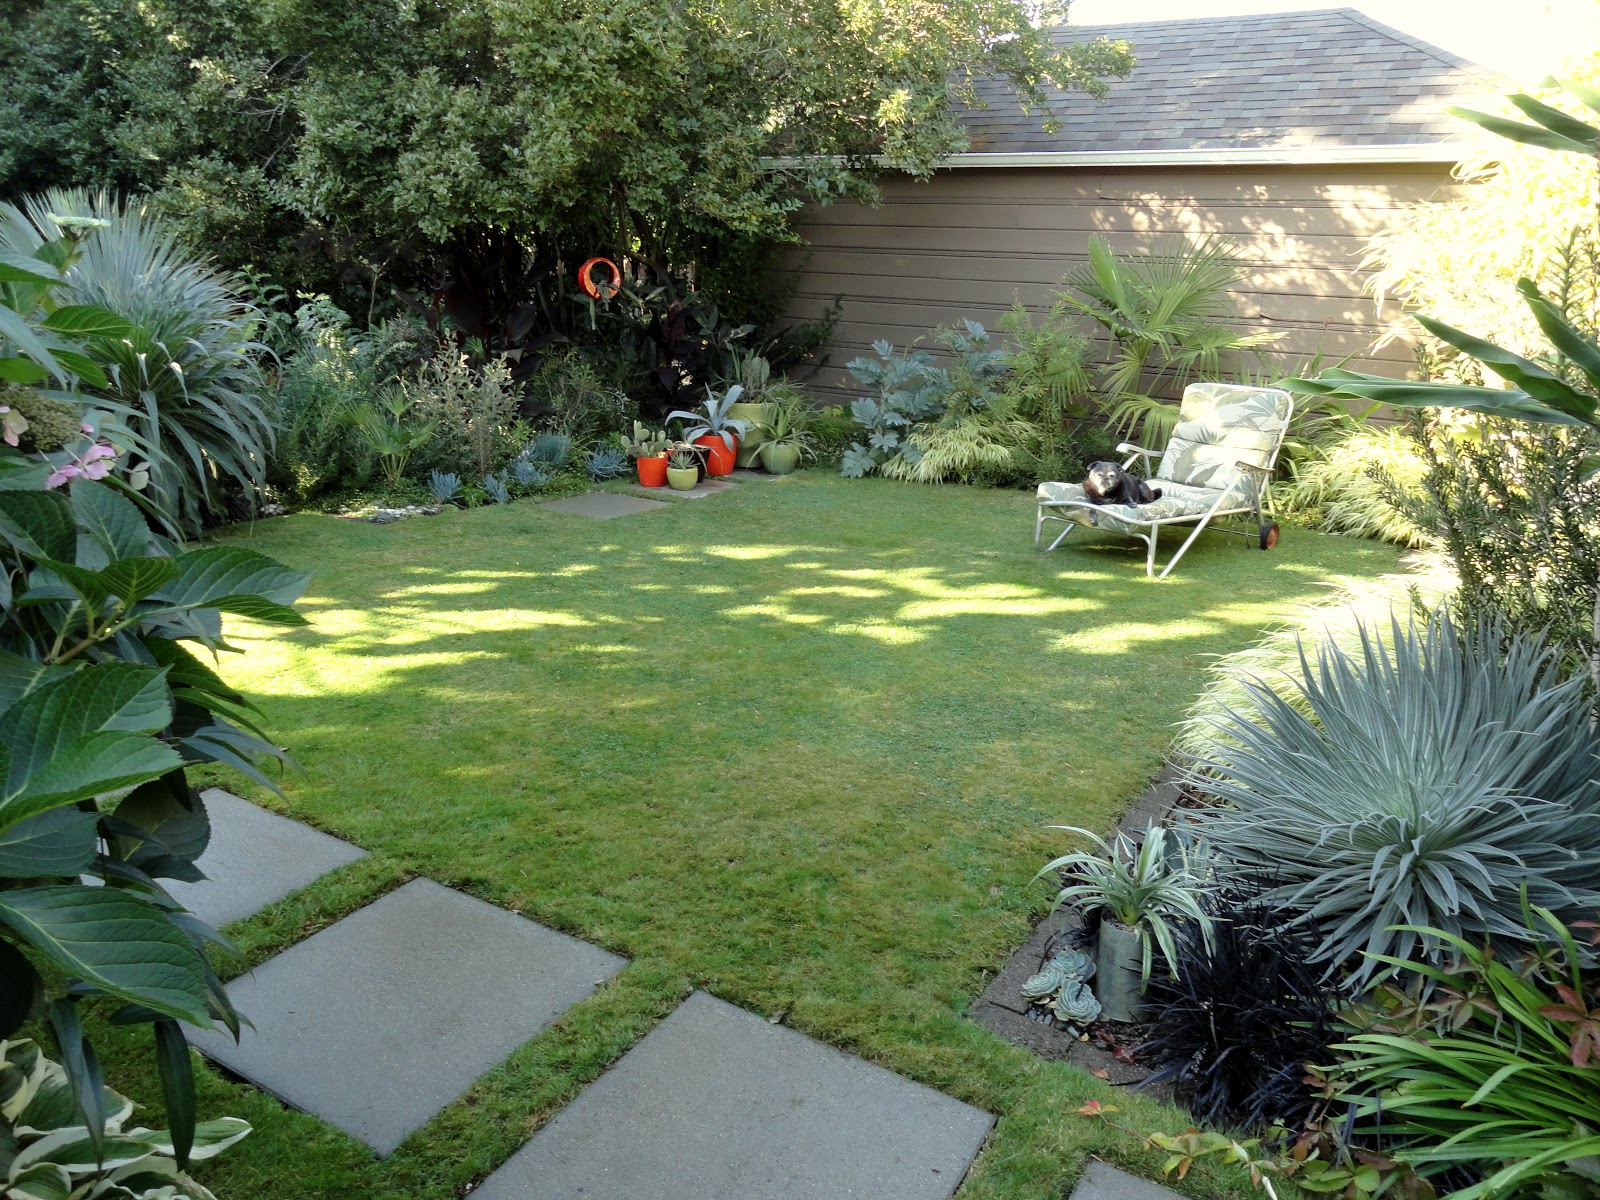 danger garden: Yes as a matter of fact I did get rid of some lawn…